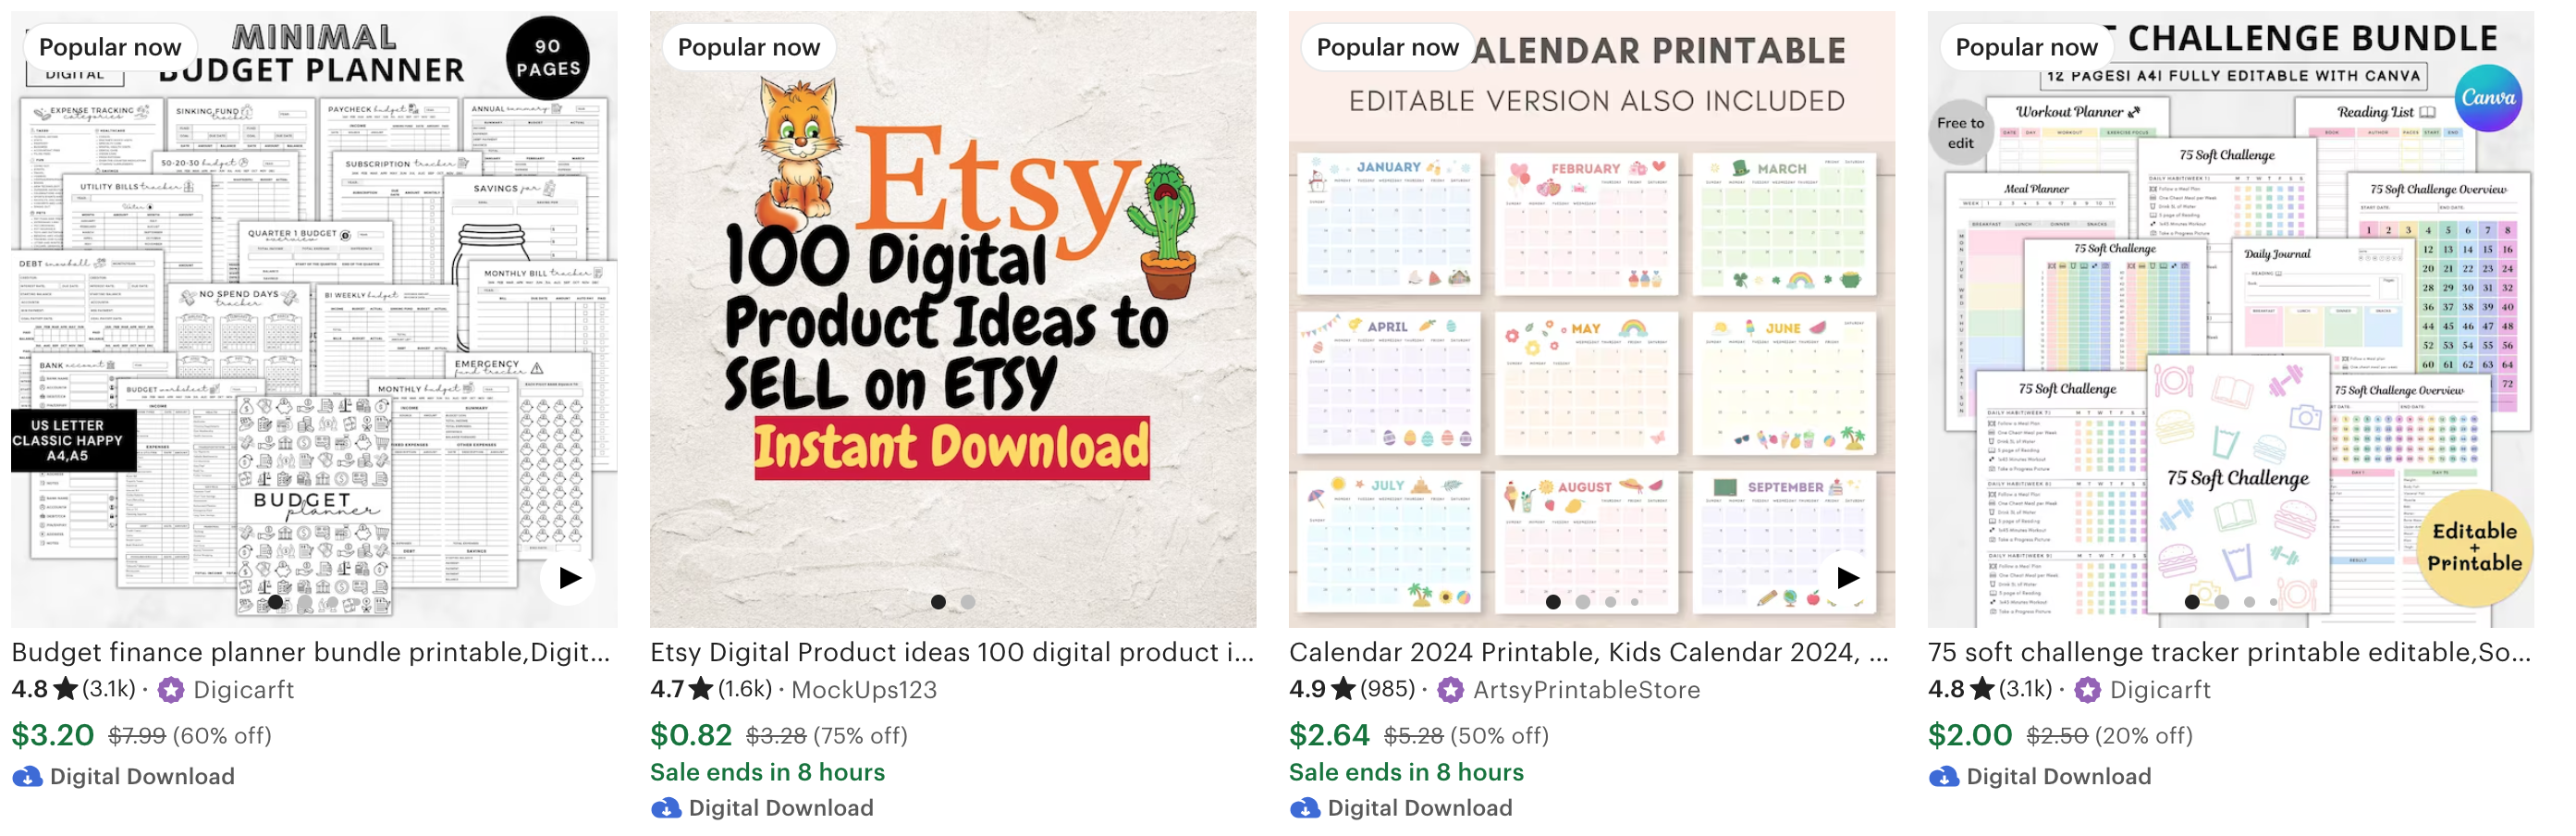 Popular Printables to Sell on Etsy